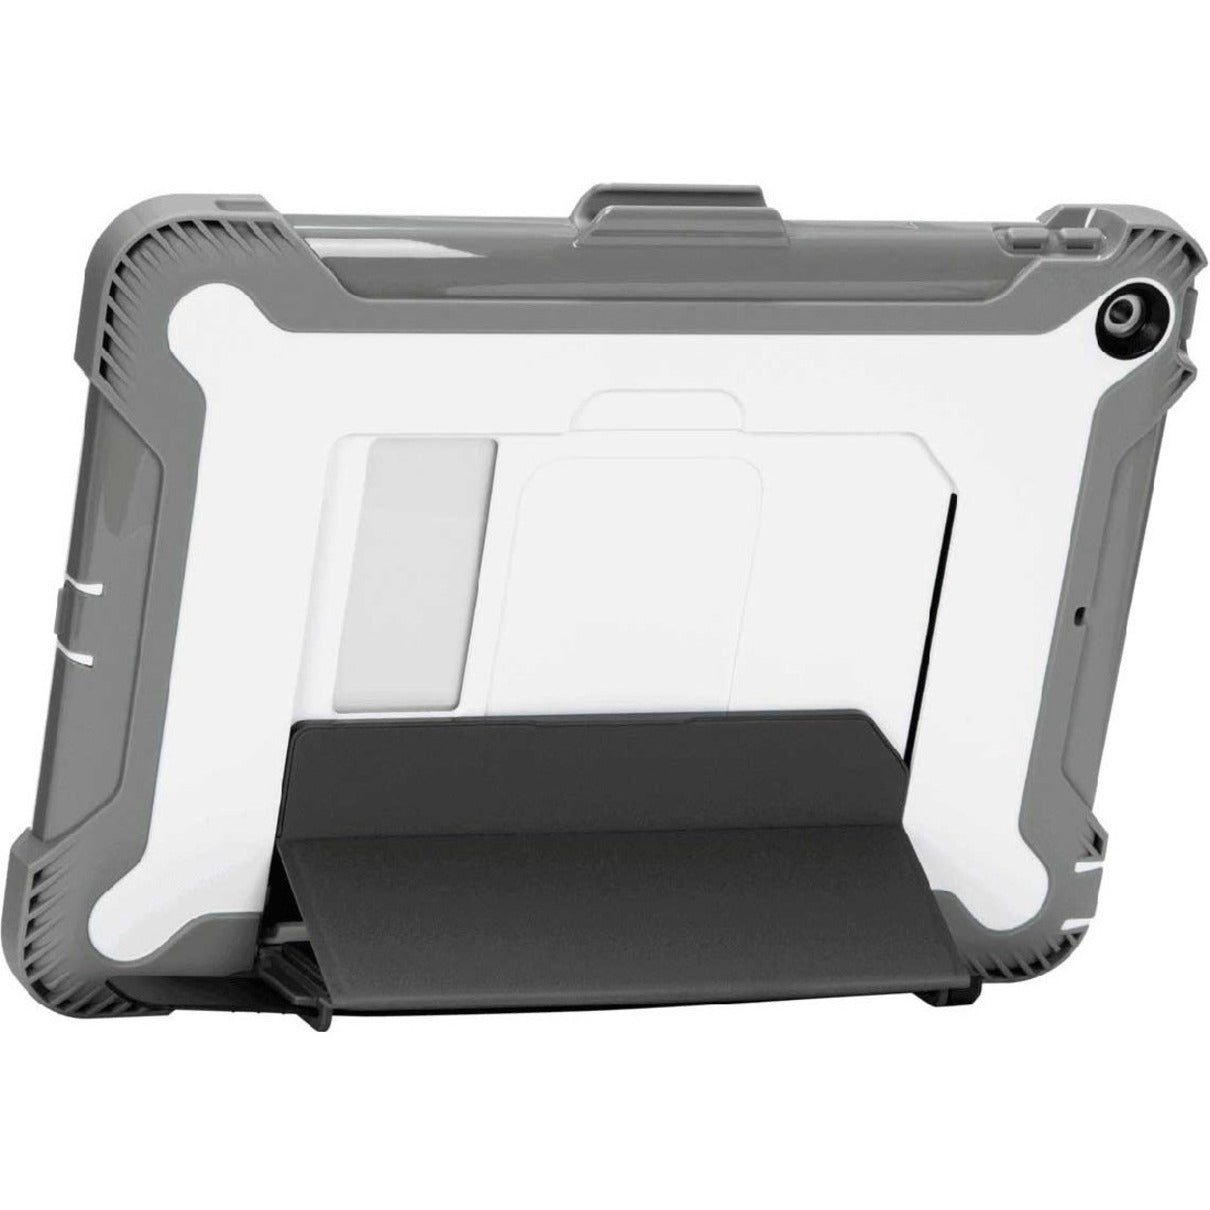 Targus THD49912GLZ SafePort Rugged Healthcare Case for iPad 10.2-inch, Bump Resistant, Shock Absorbing, Water Resistant